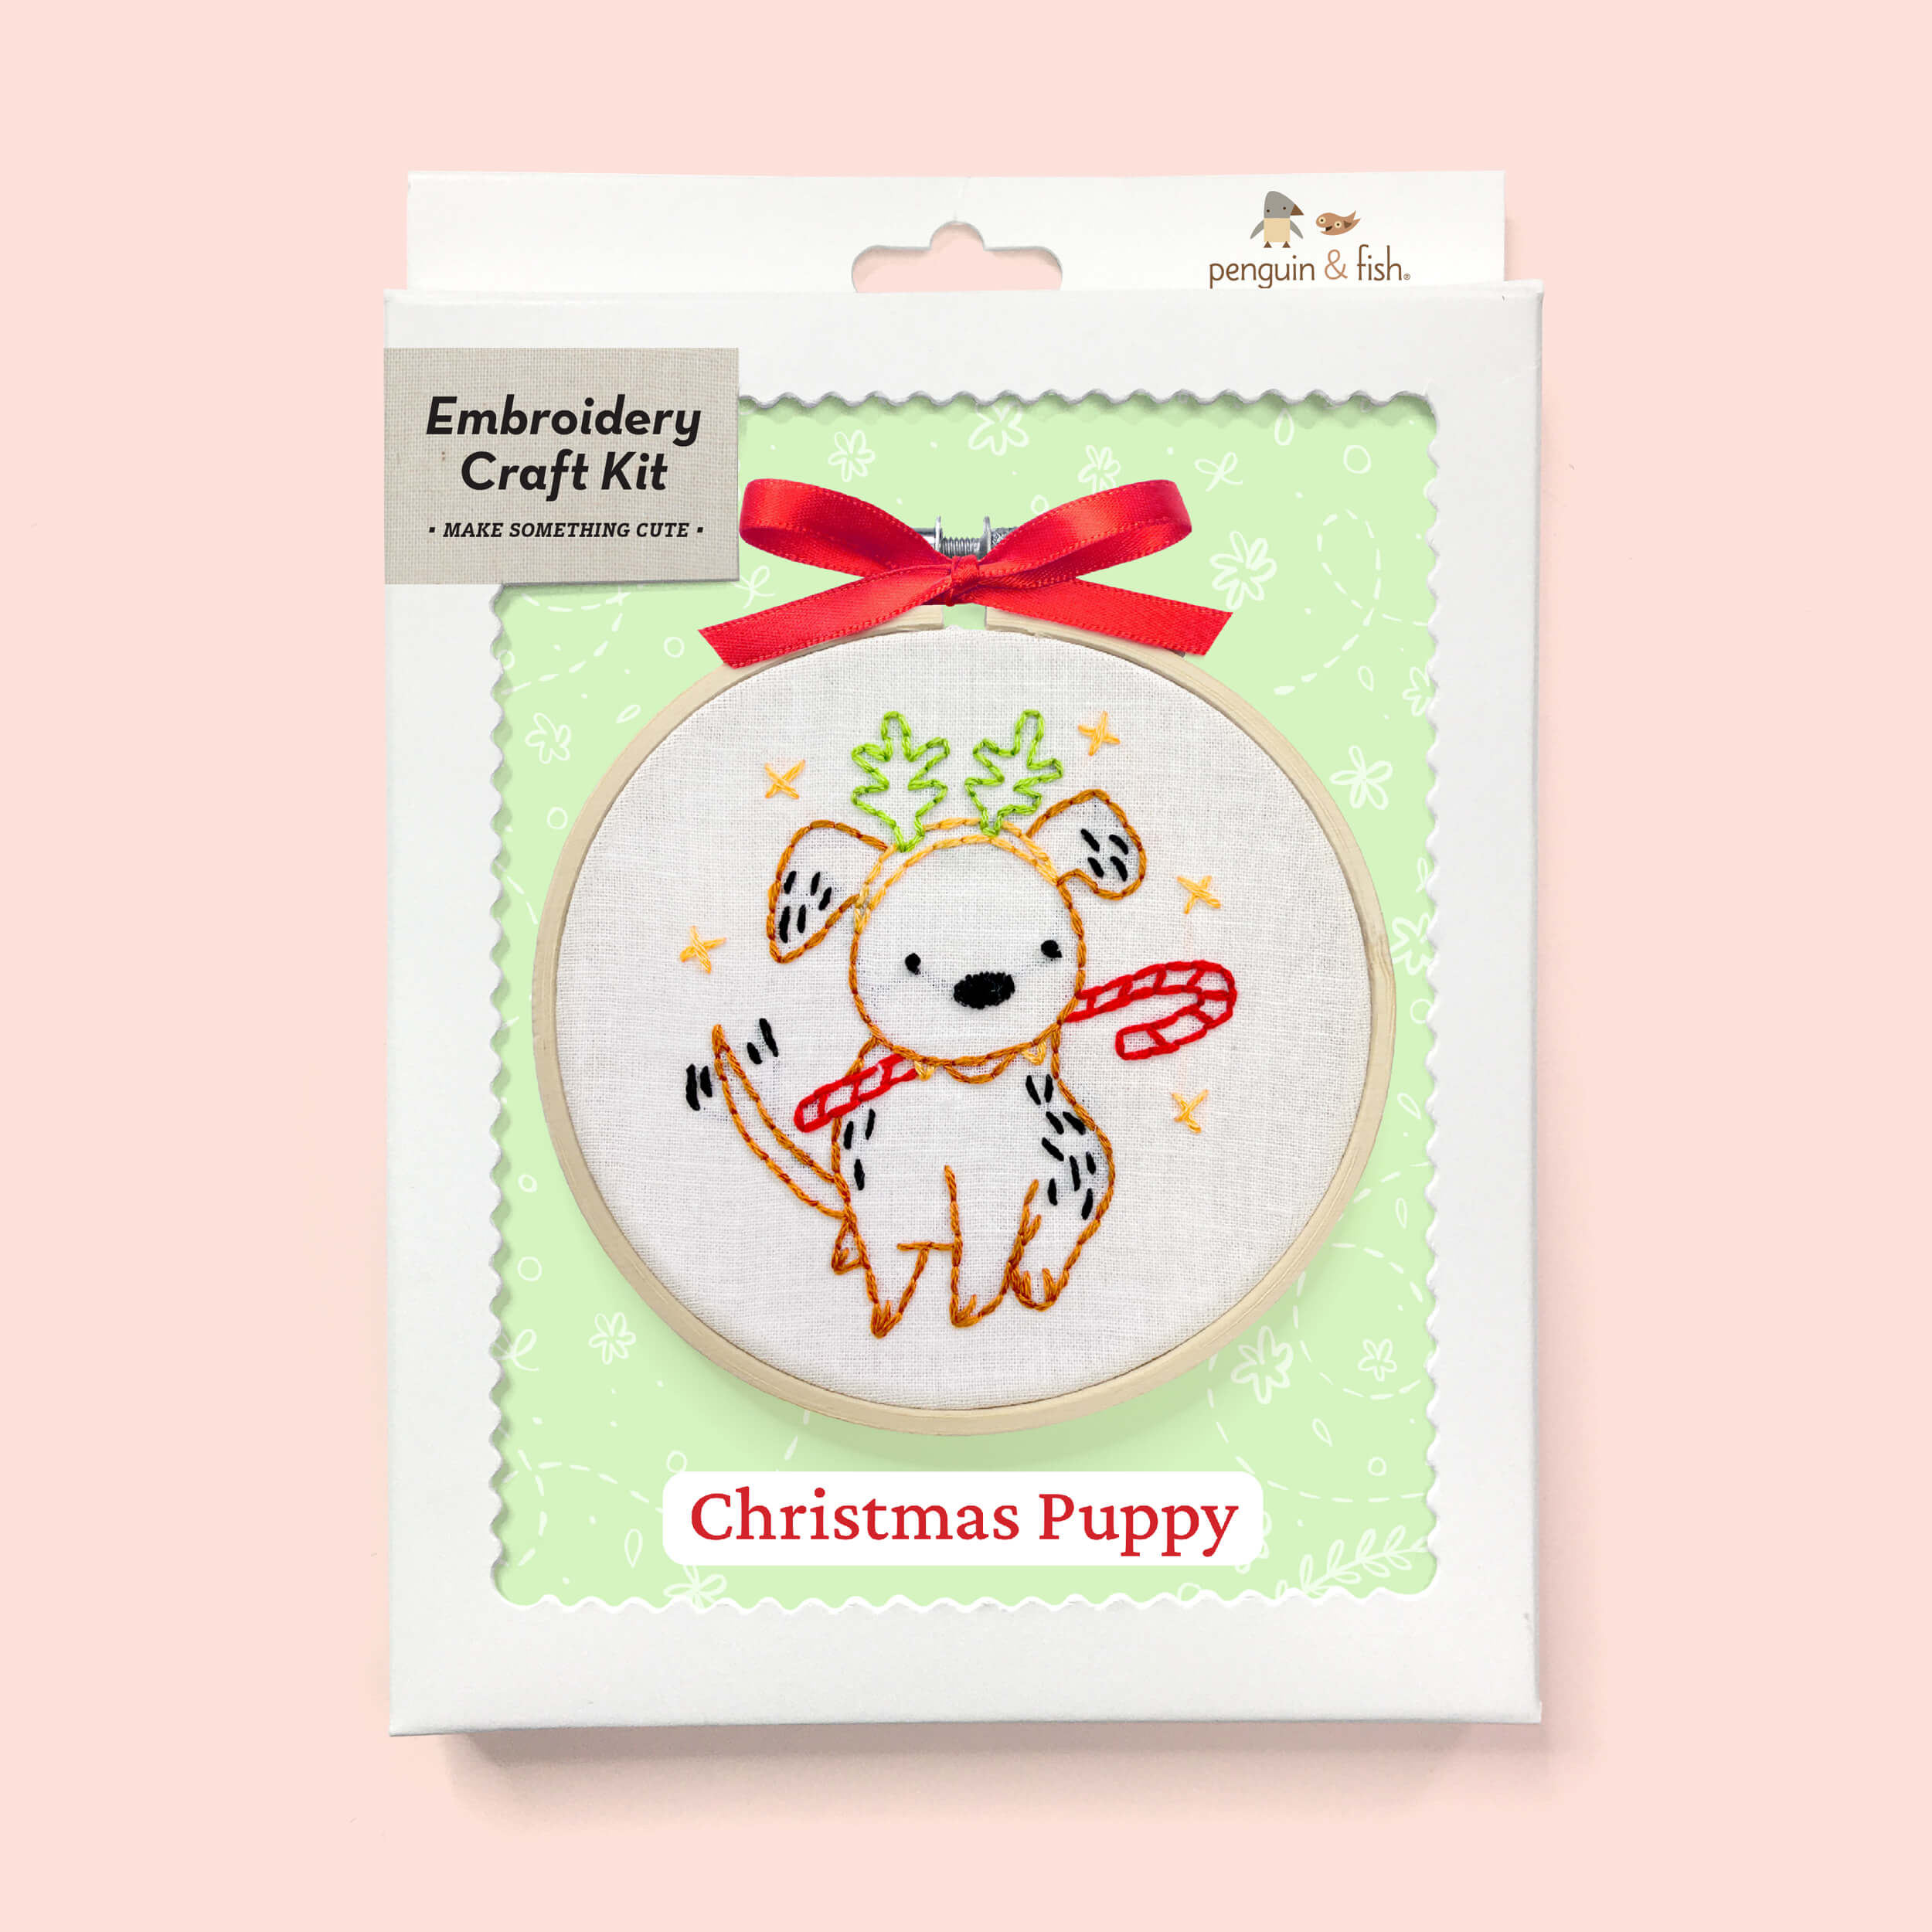 Christmas Puppy embroidery kit in a box